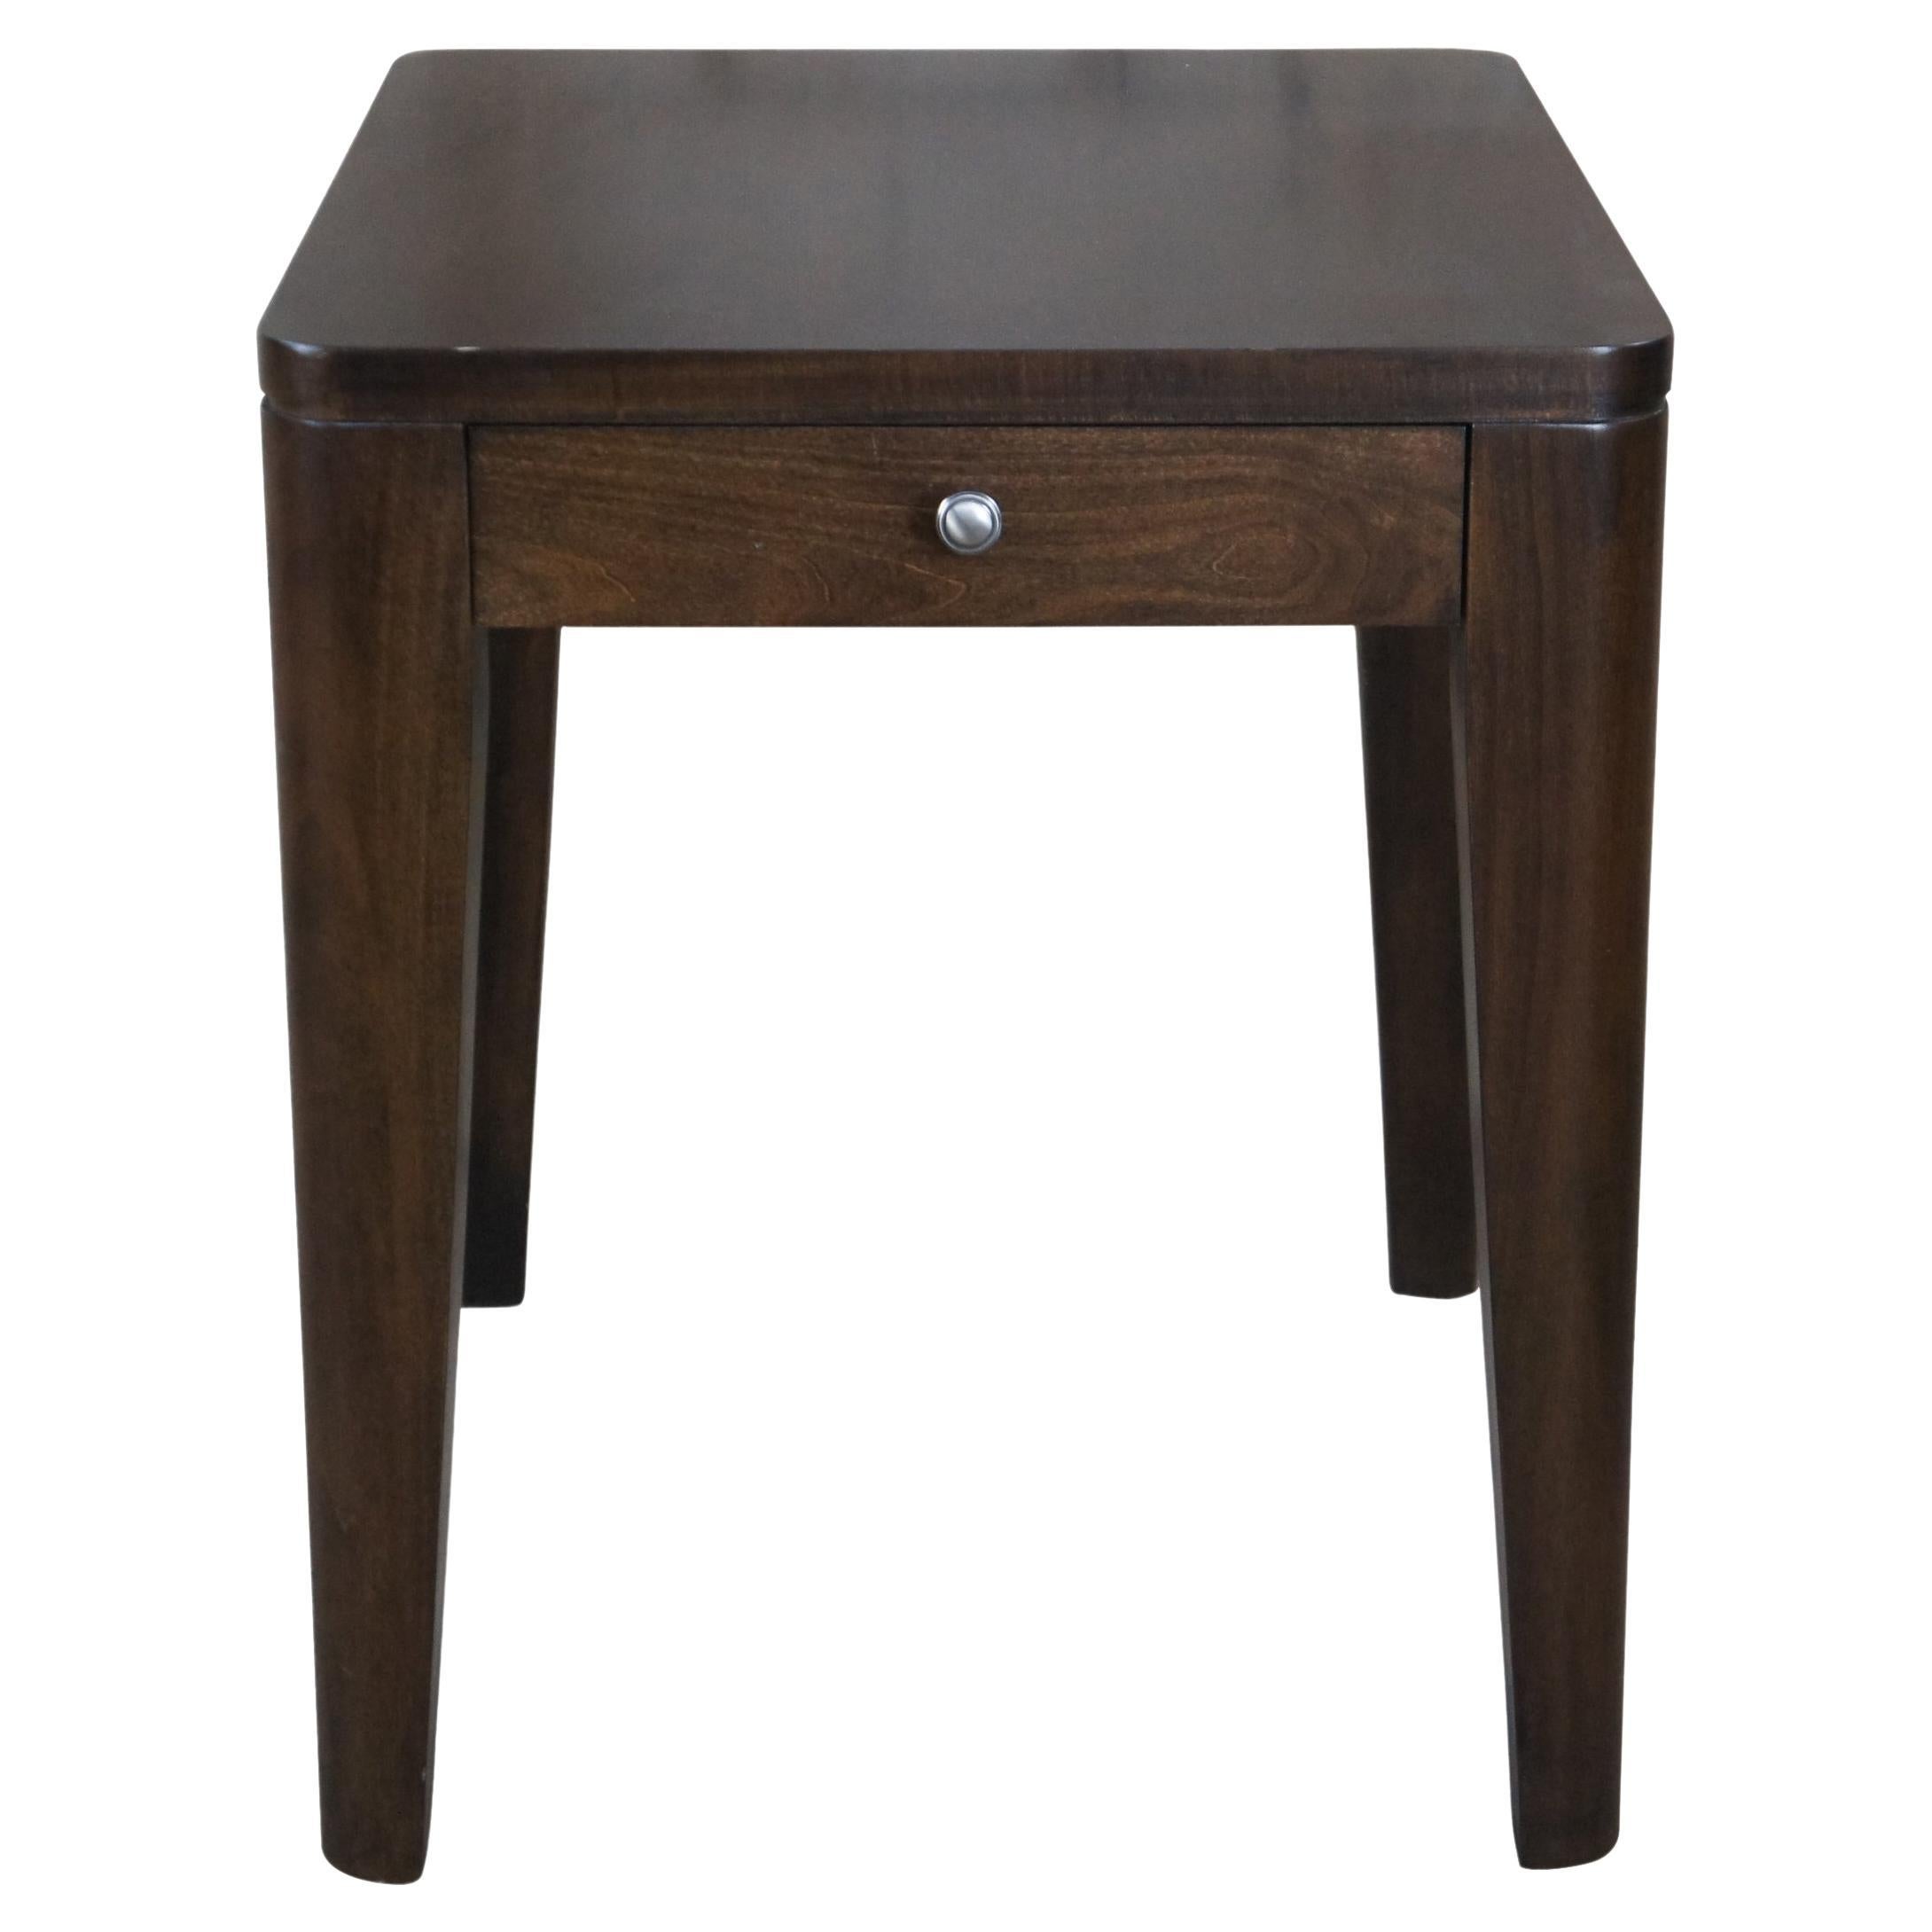 Heritage Modern Walnut Finish Occasional End Table or Nightstand 260-840-1